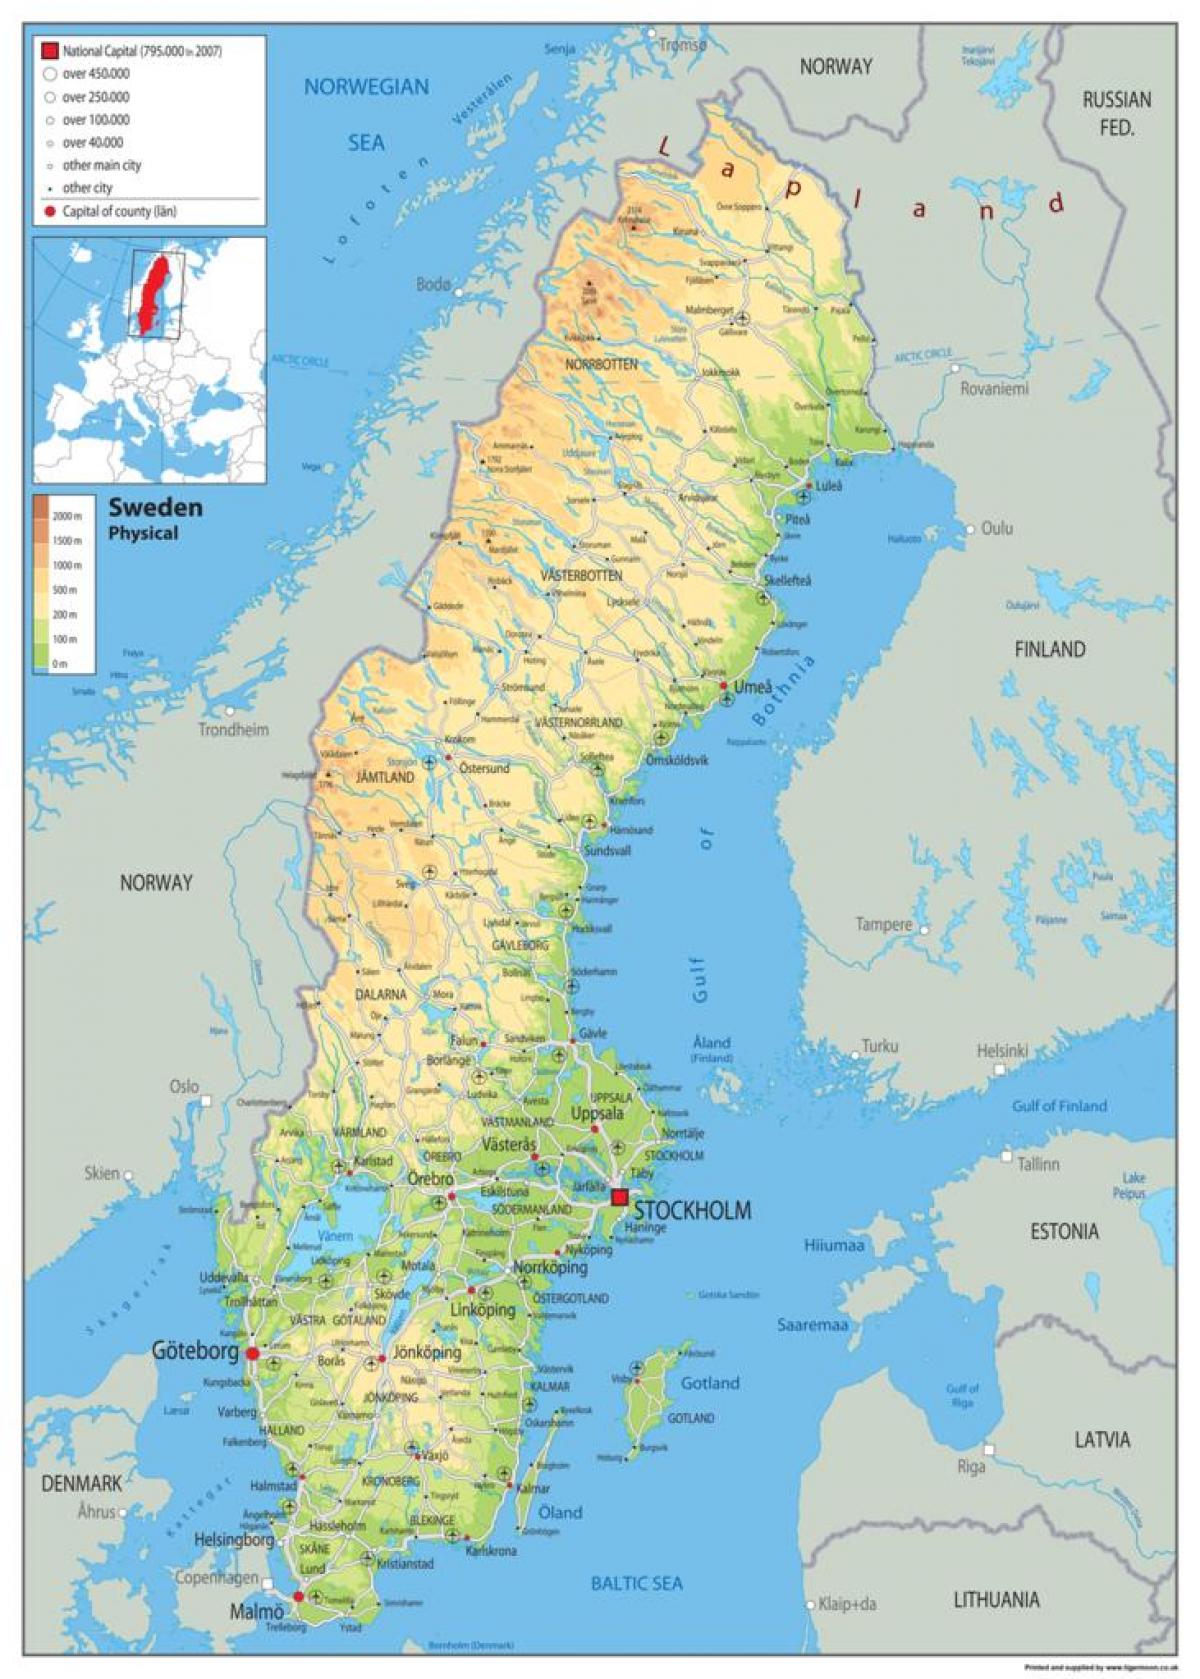 Sweden physical map - Physical map of Sweden (Northern Europe - Europe)